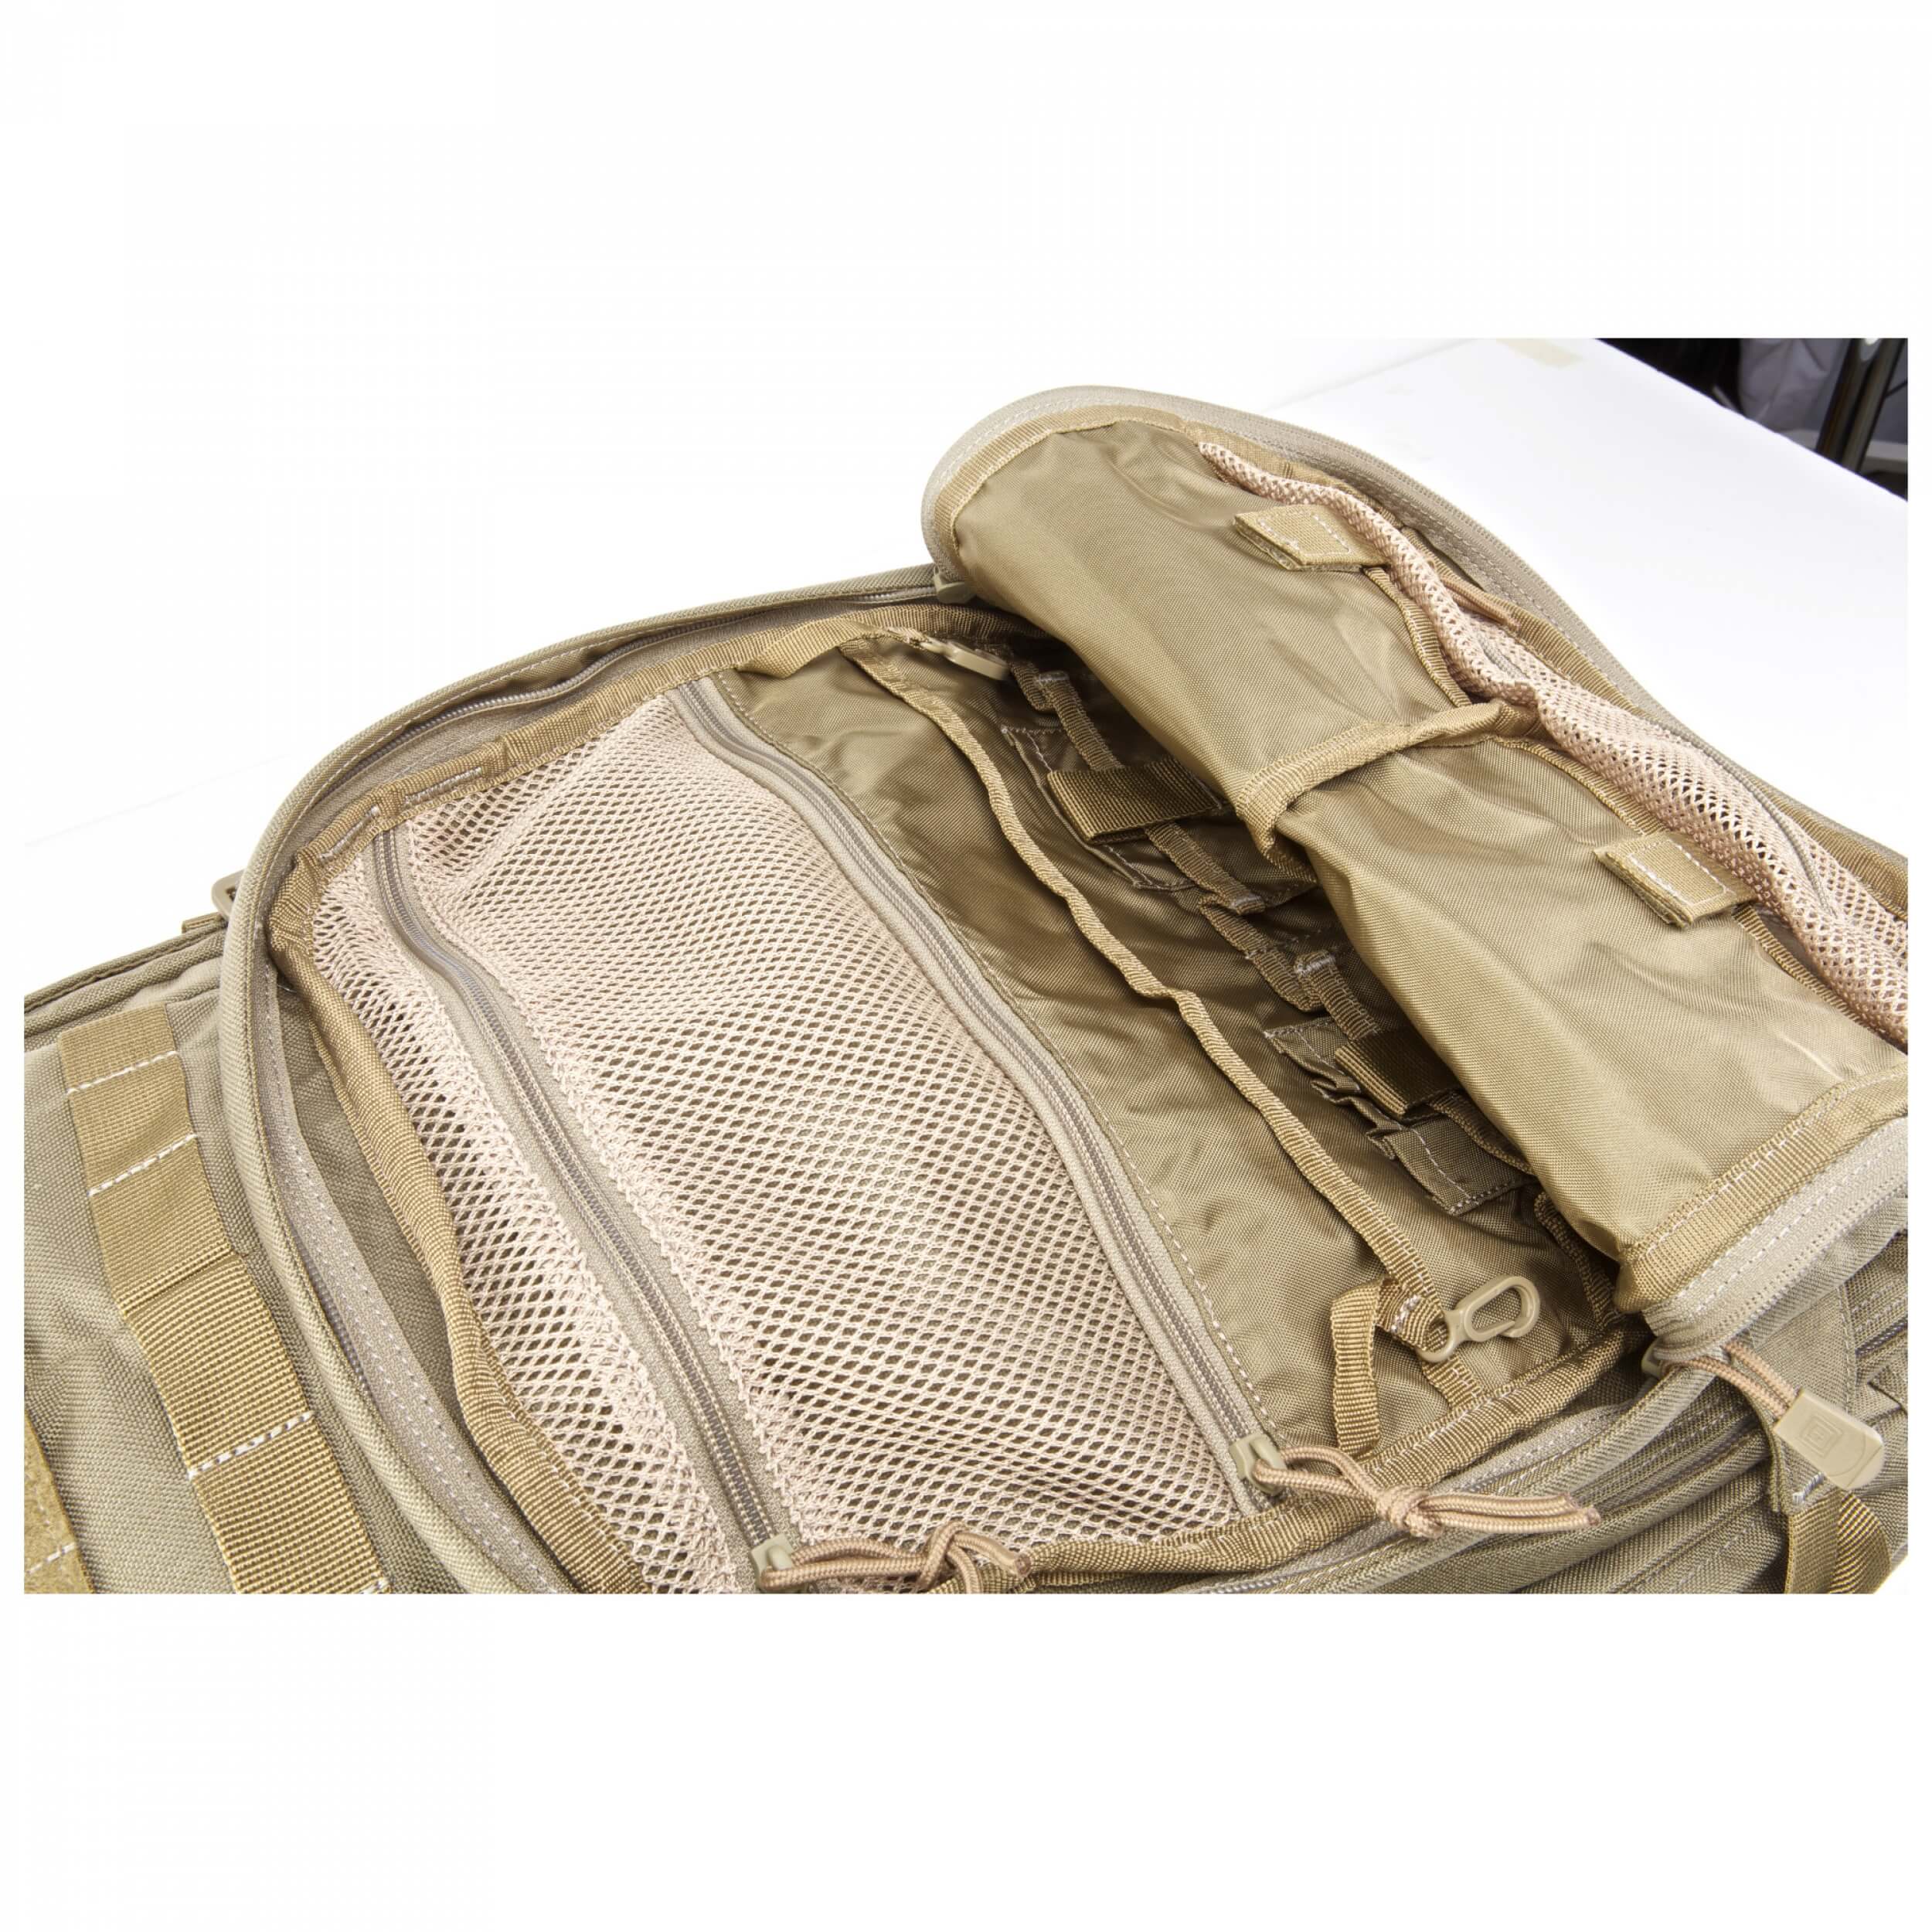 5.11 Tactical Rush 72 Backpack Storm